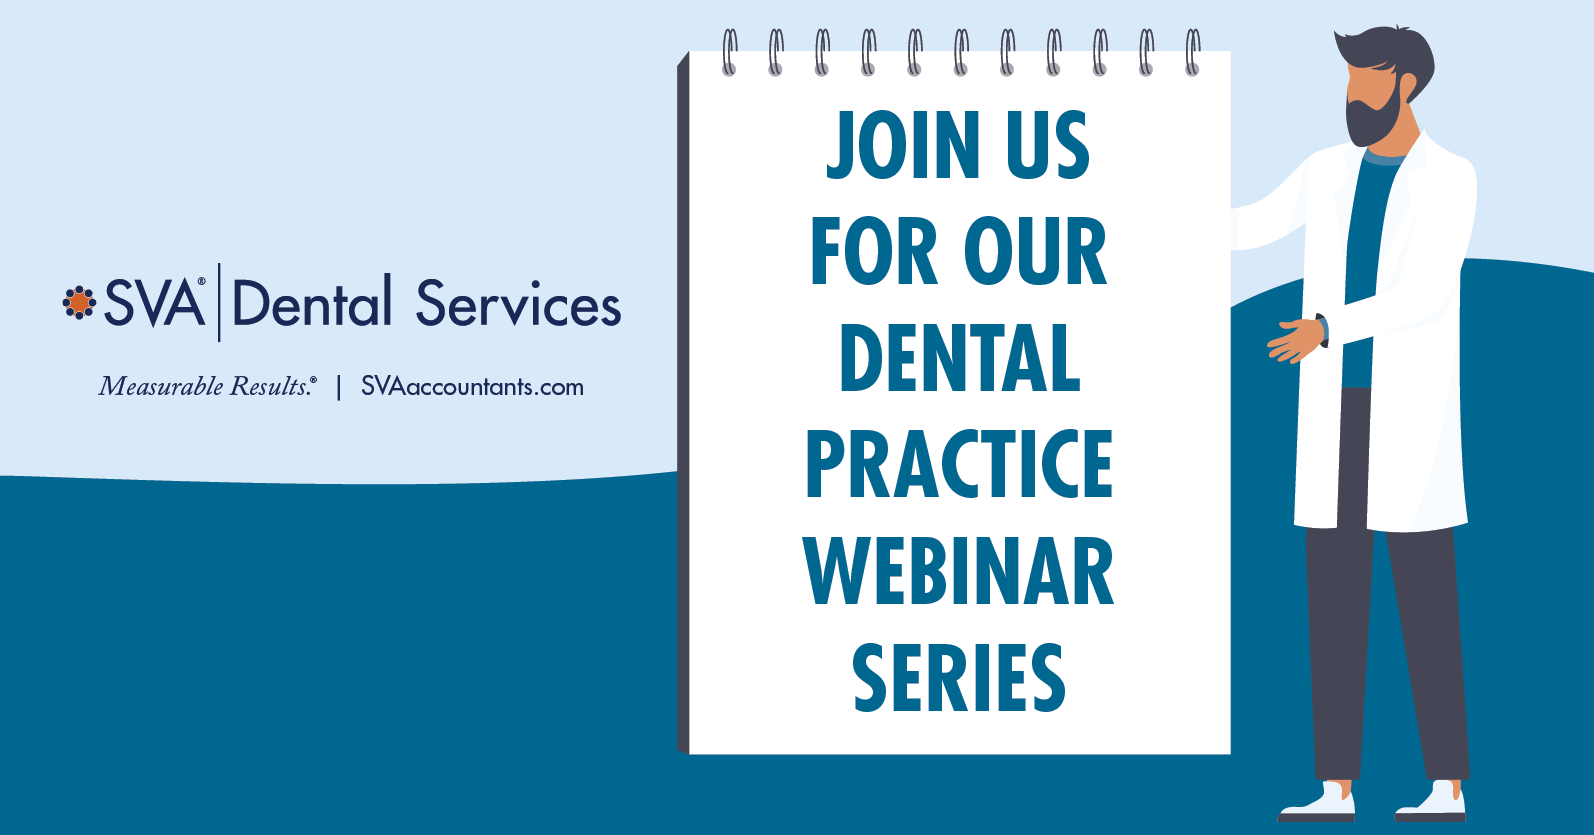 Dental Webinar Series: Get Ready for a Buy, Sell, or Owner Transition Scenario